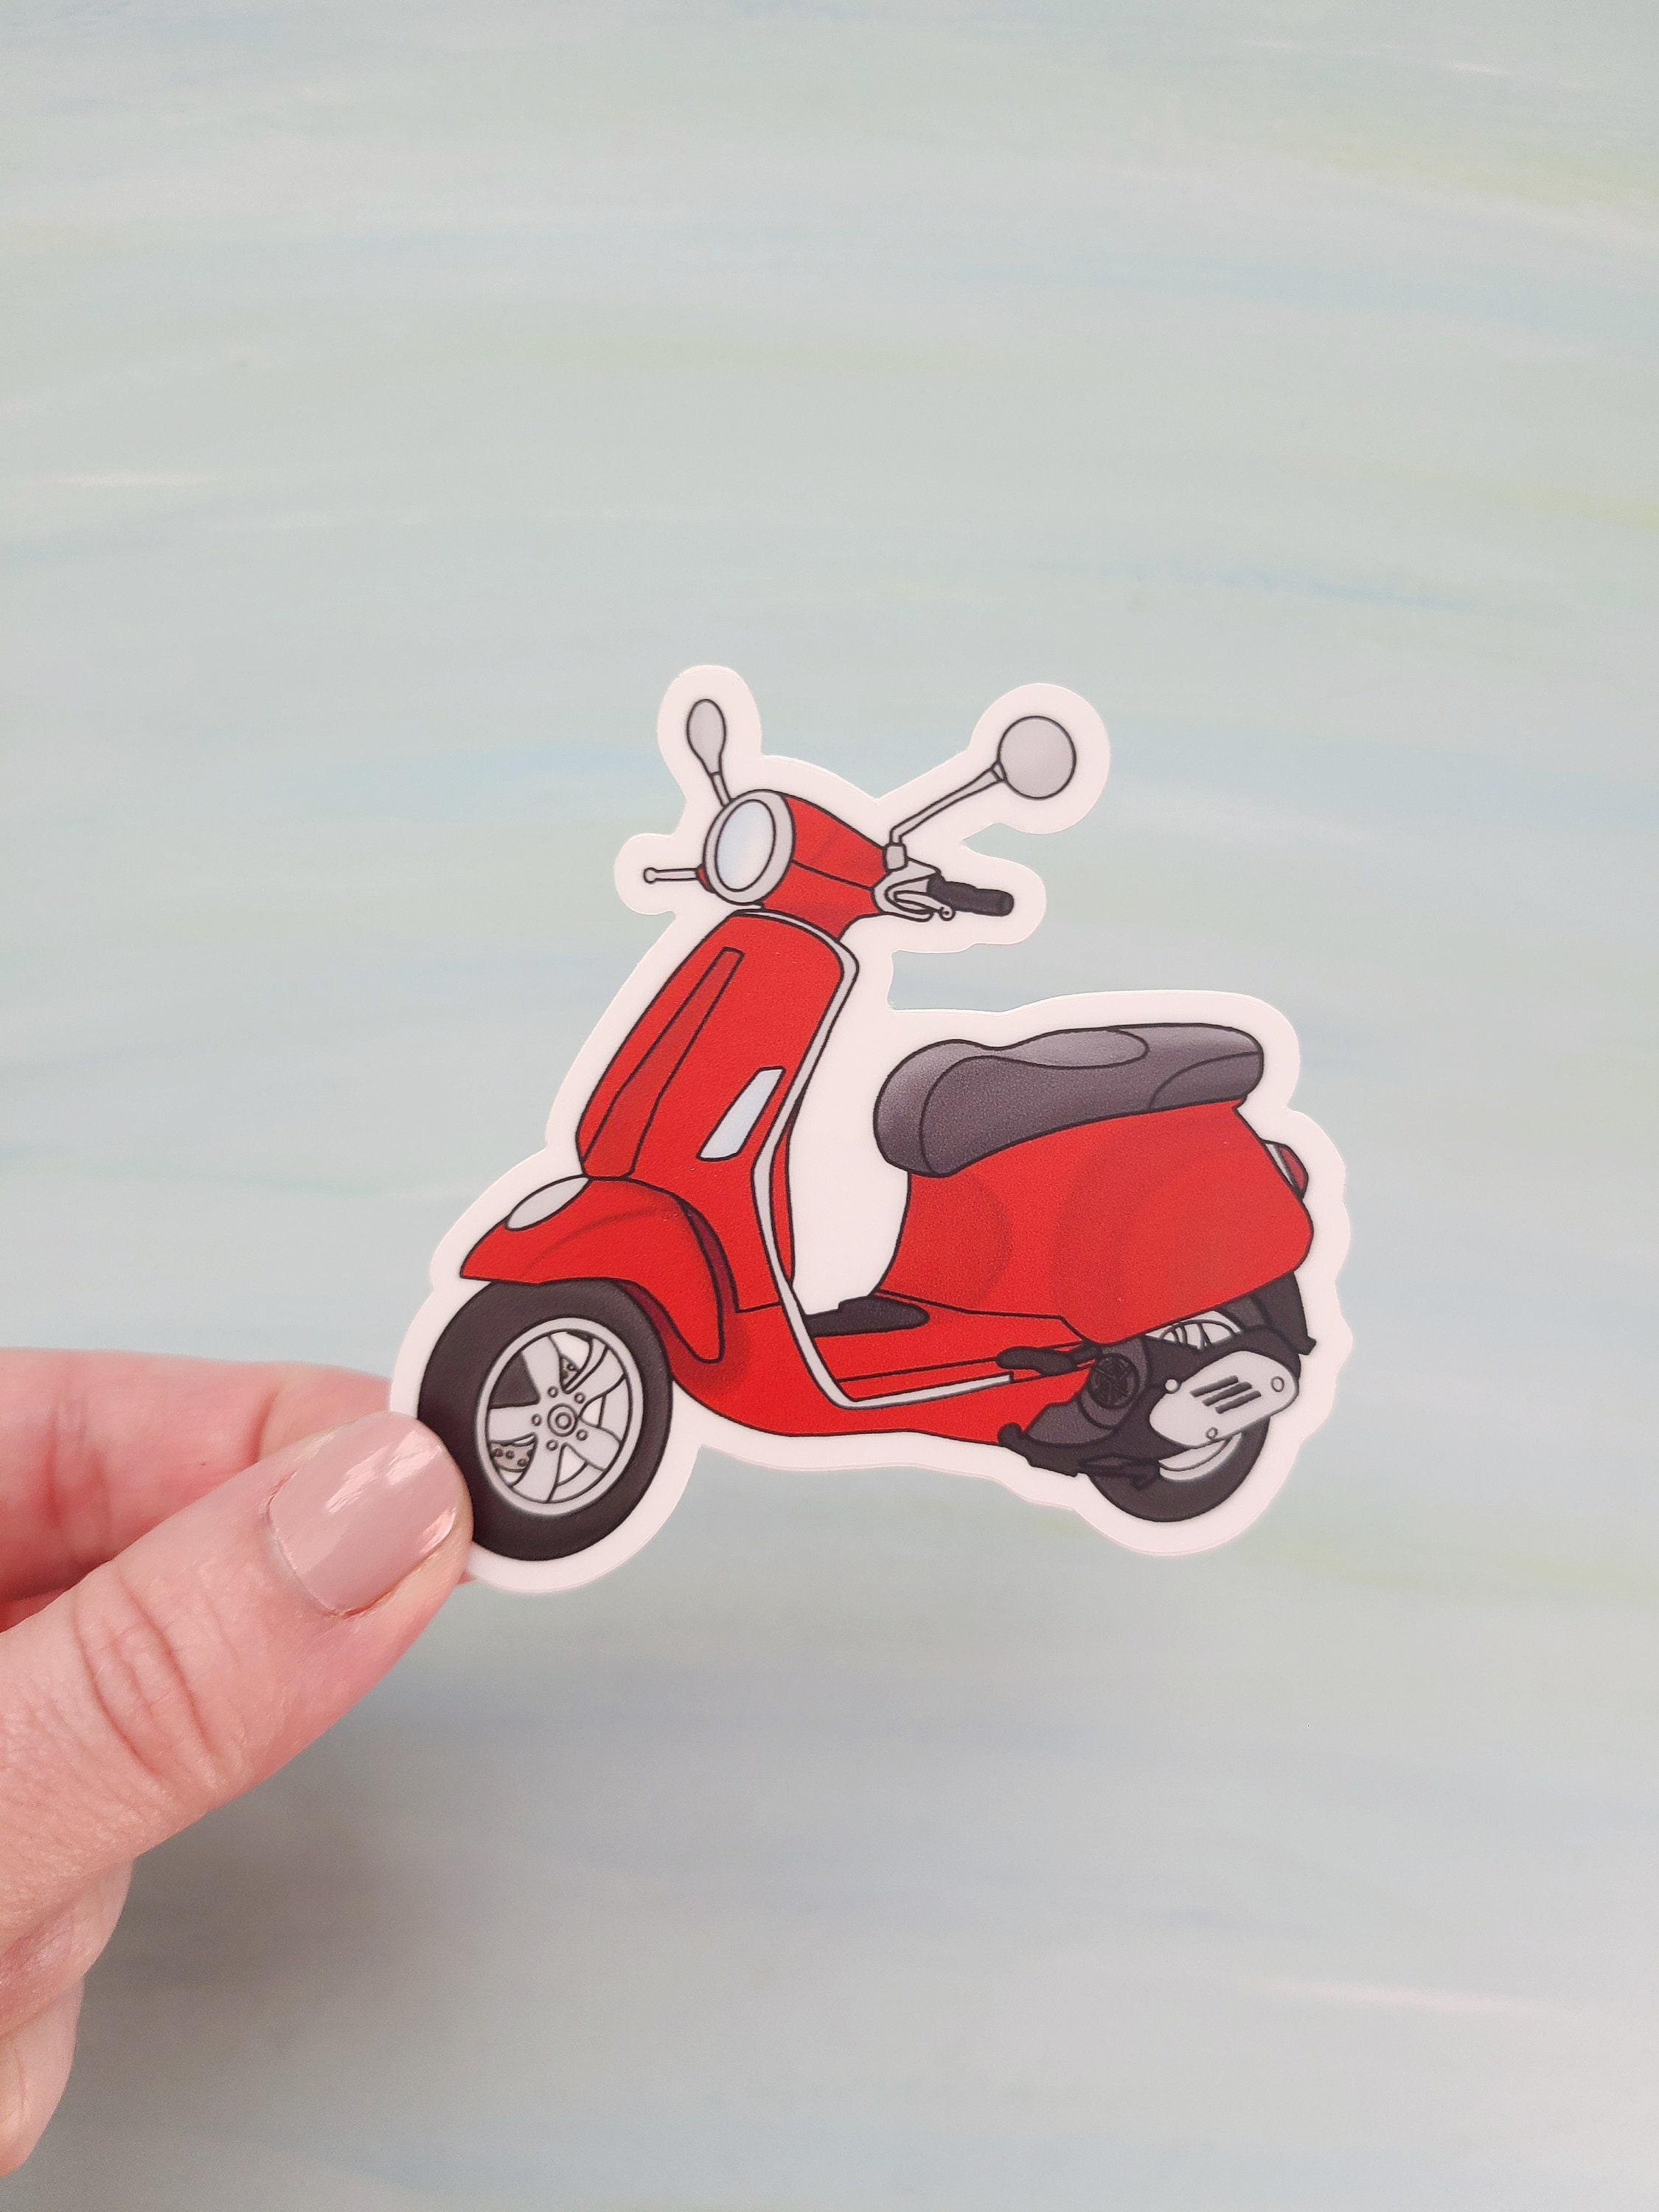 Moped Decal 